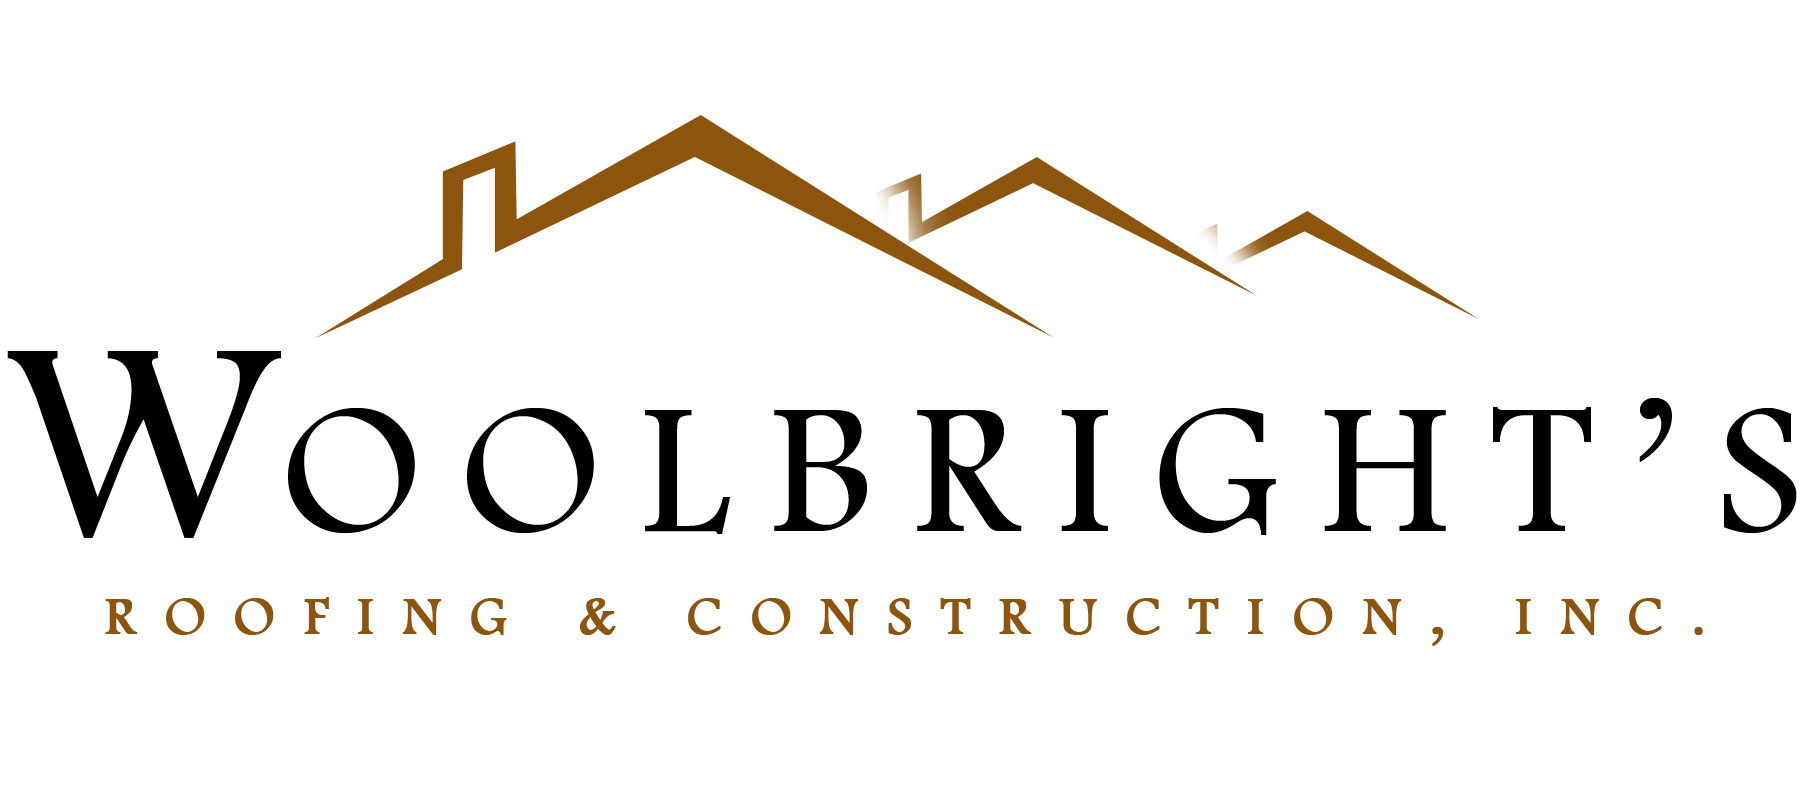 Woolbright's Roofing and Construction, Inc. Logo